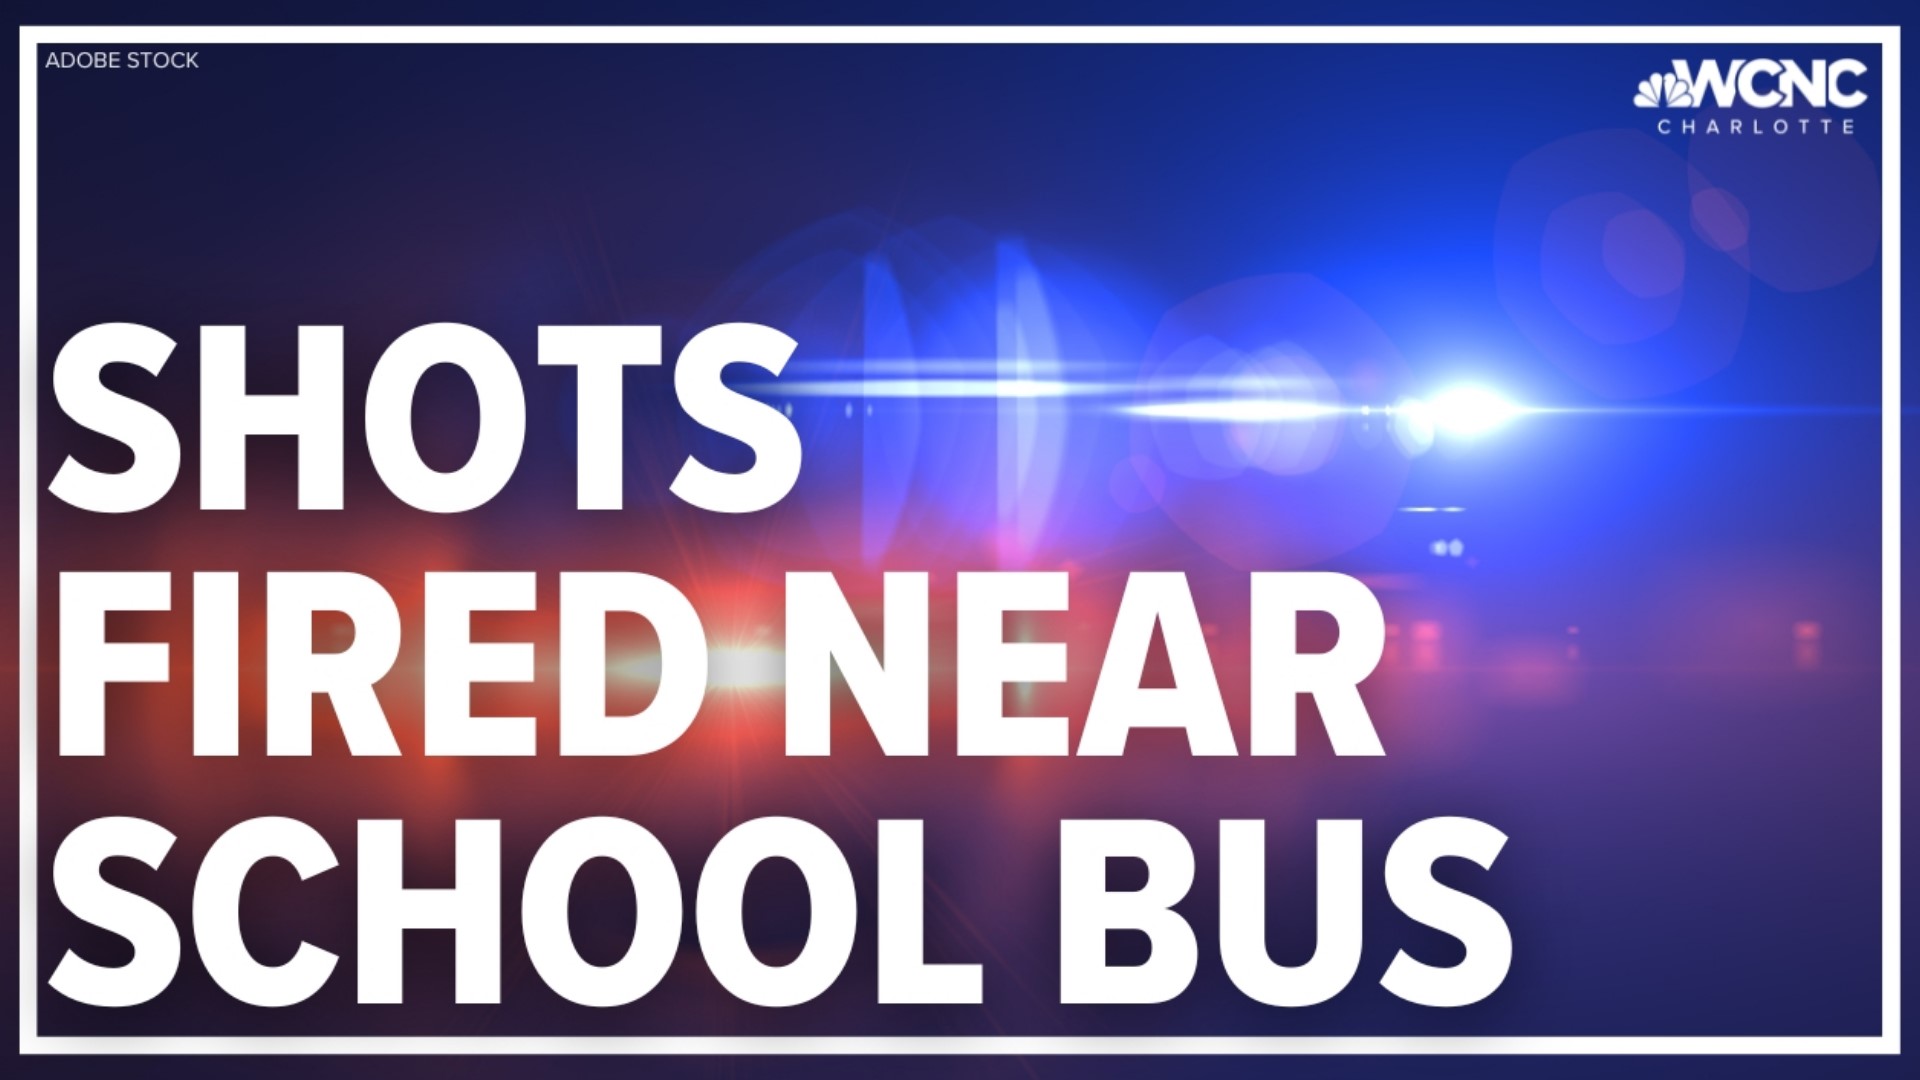 Police are investigating a shooting that occurred in front of a Charlotte-Mecklenburg Schools bus on Tuesday.